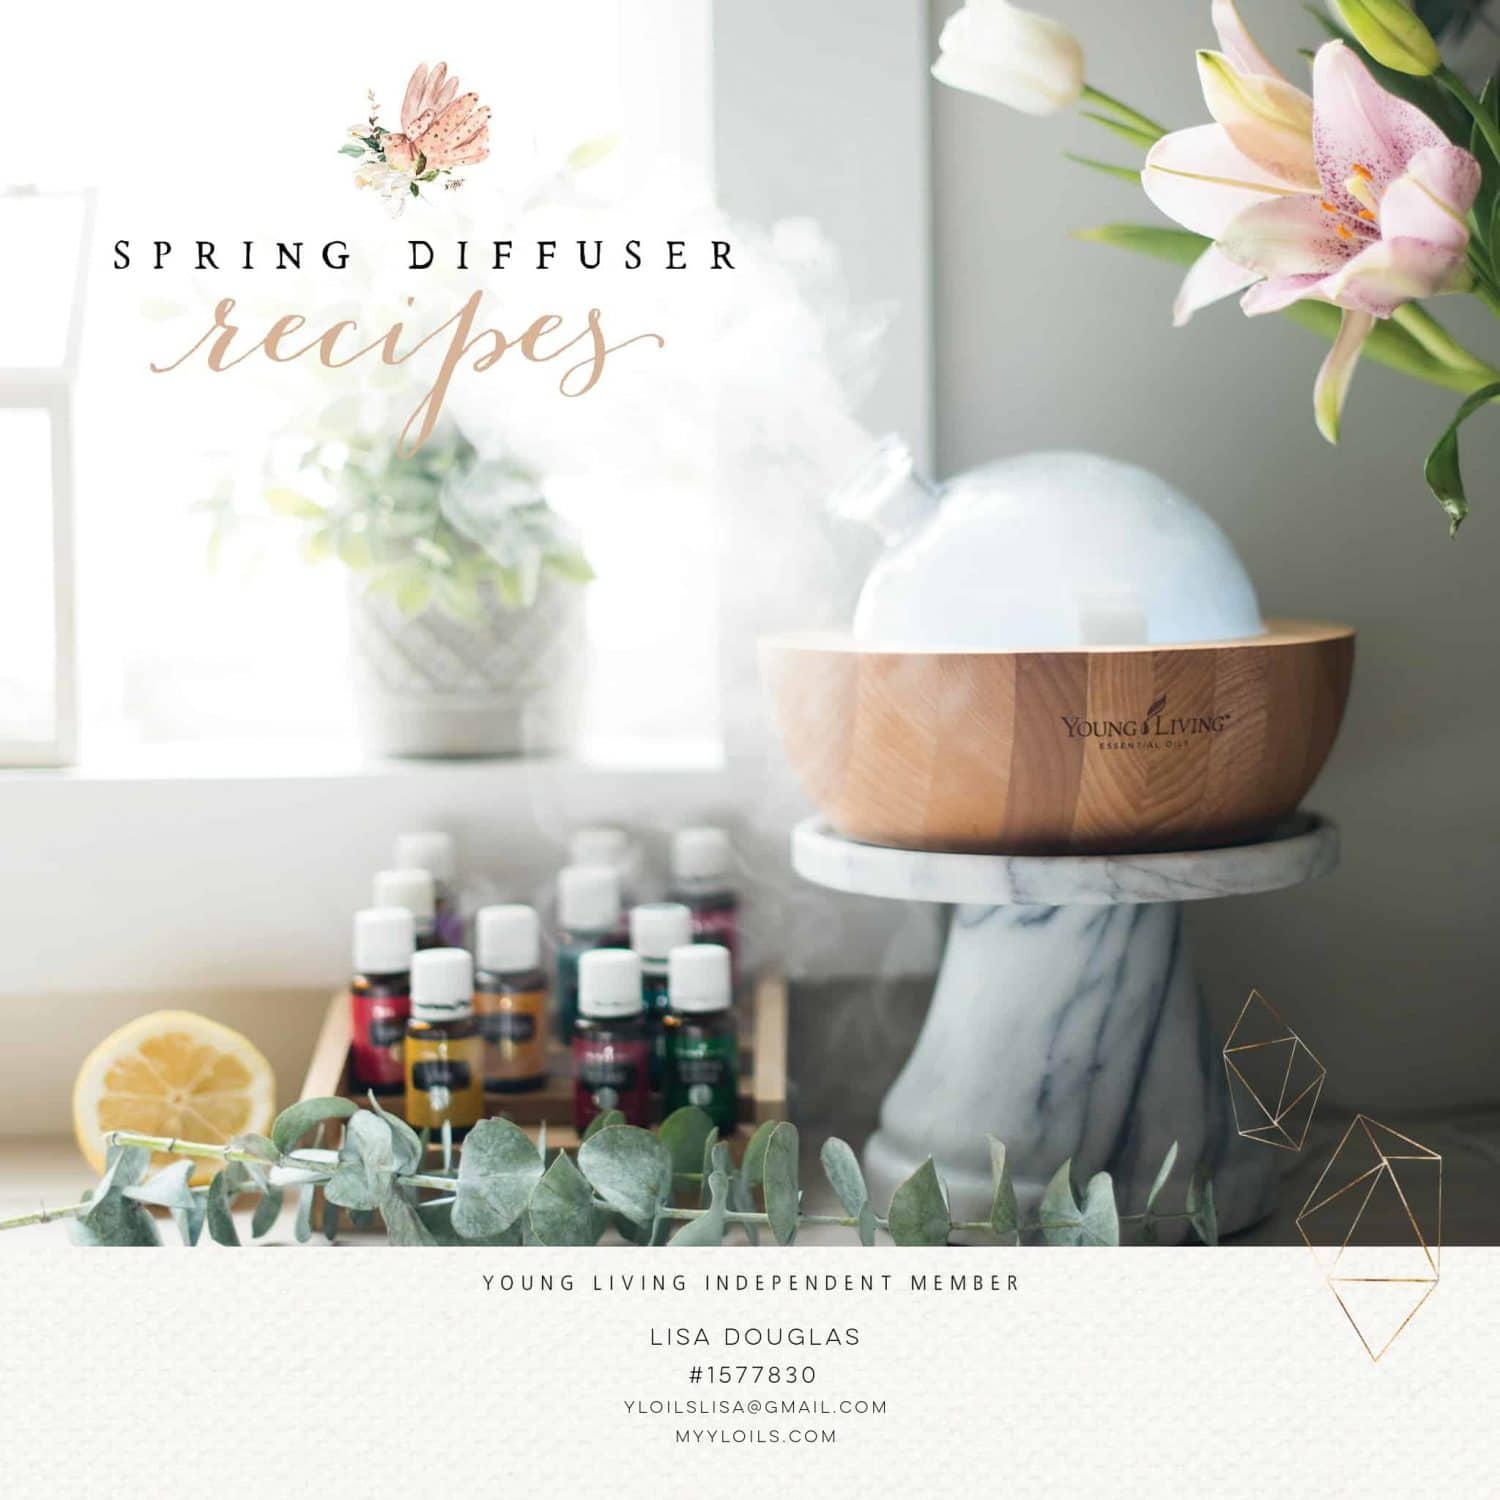 Spring Diffuser Recipes with Young Living Essential Oils